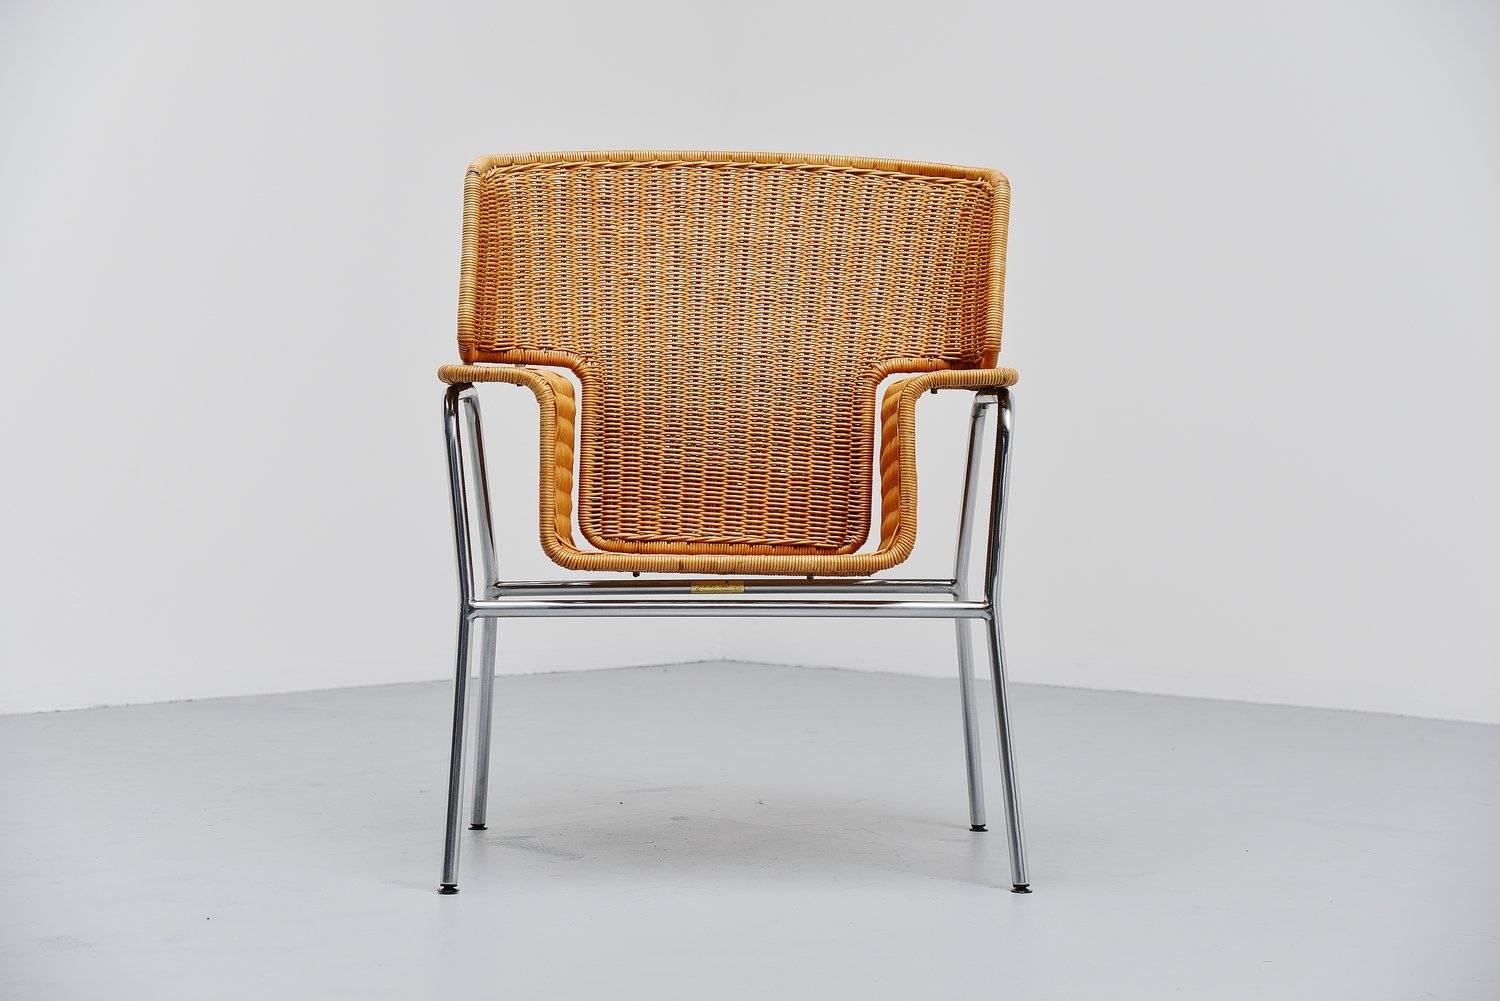 Excellent shaped armchair designed by Dirk van Sliedrecht for Rohe Noordwolde, Holland 1969. This very nice modernist shaped armchair has an unusual shape but therefor its a very special chair. The frame is made of brushed steel and the seat is made